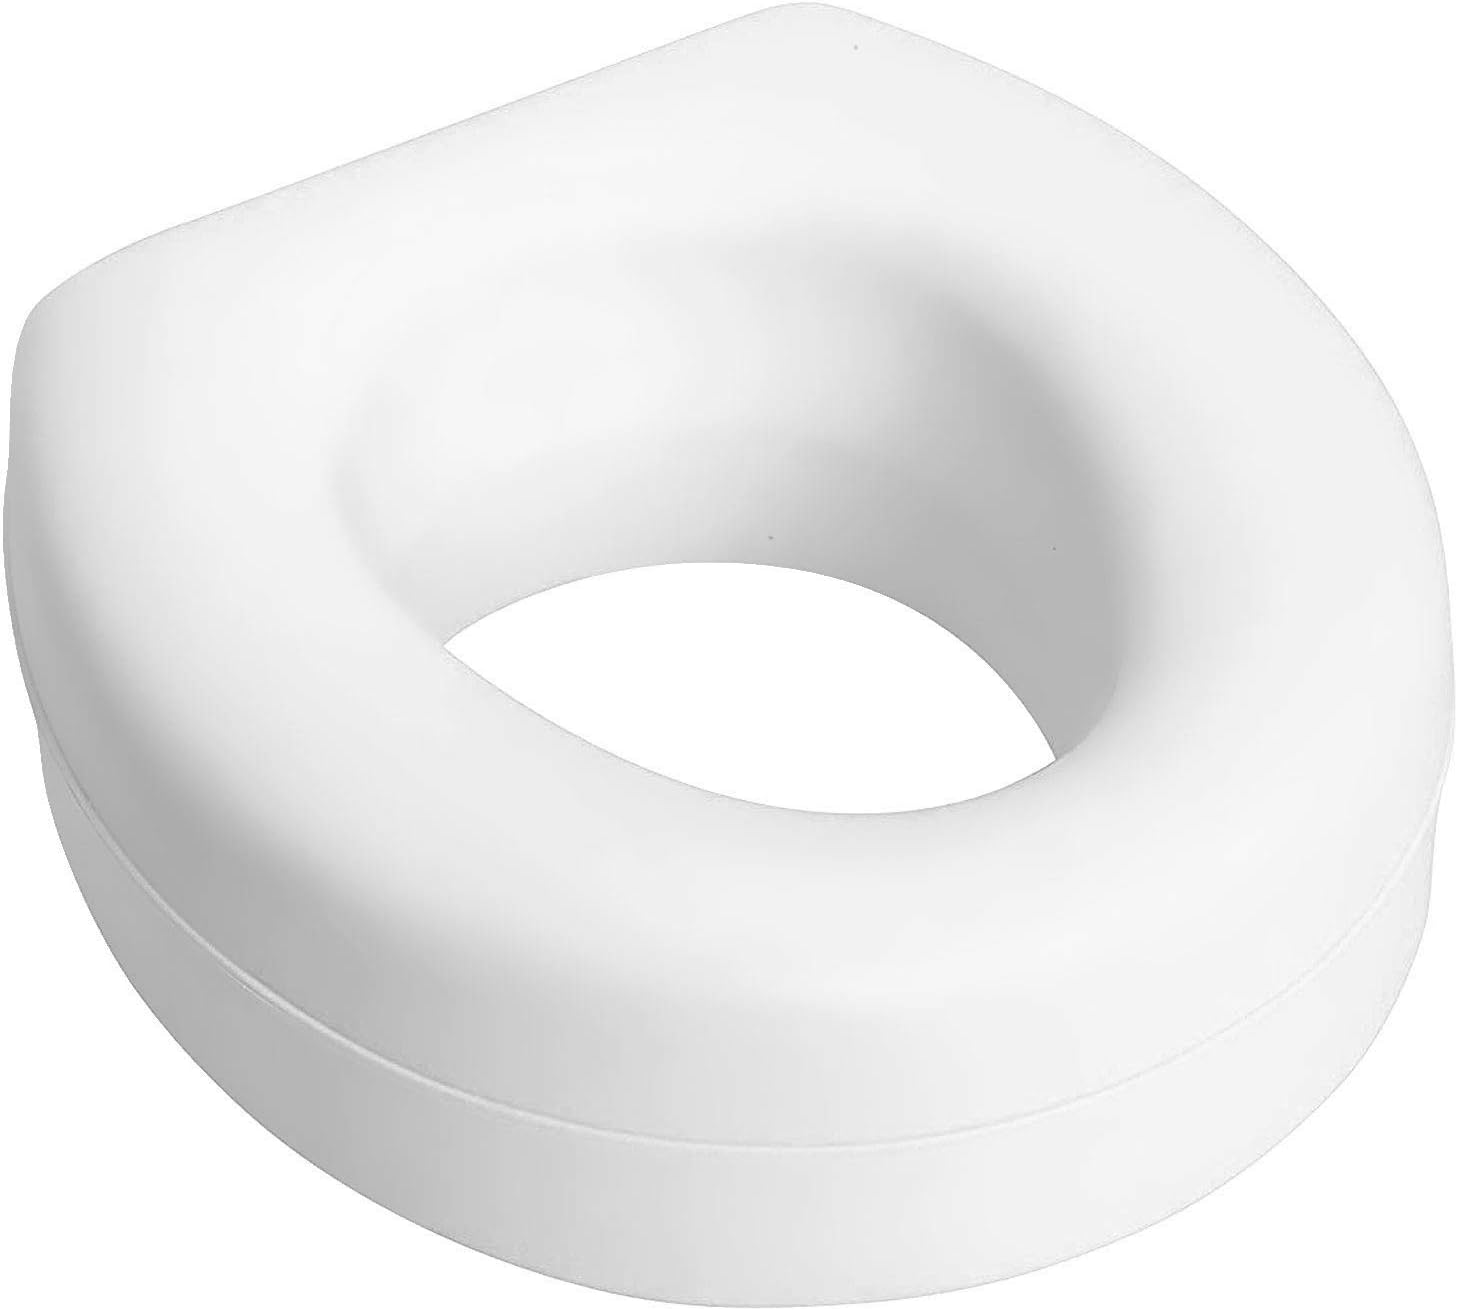 Generic HealthSmart Raised Toilet Seat Riser That Fits Most Standard Bowls for Enhanced Comfort and Elevation with Slip Resistant Pads,